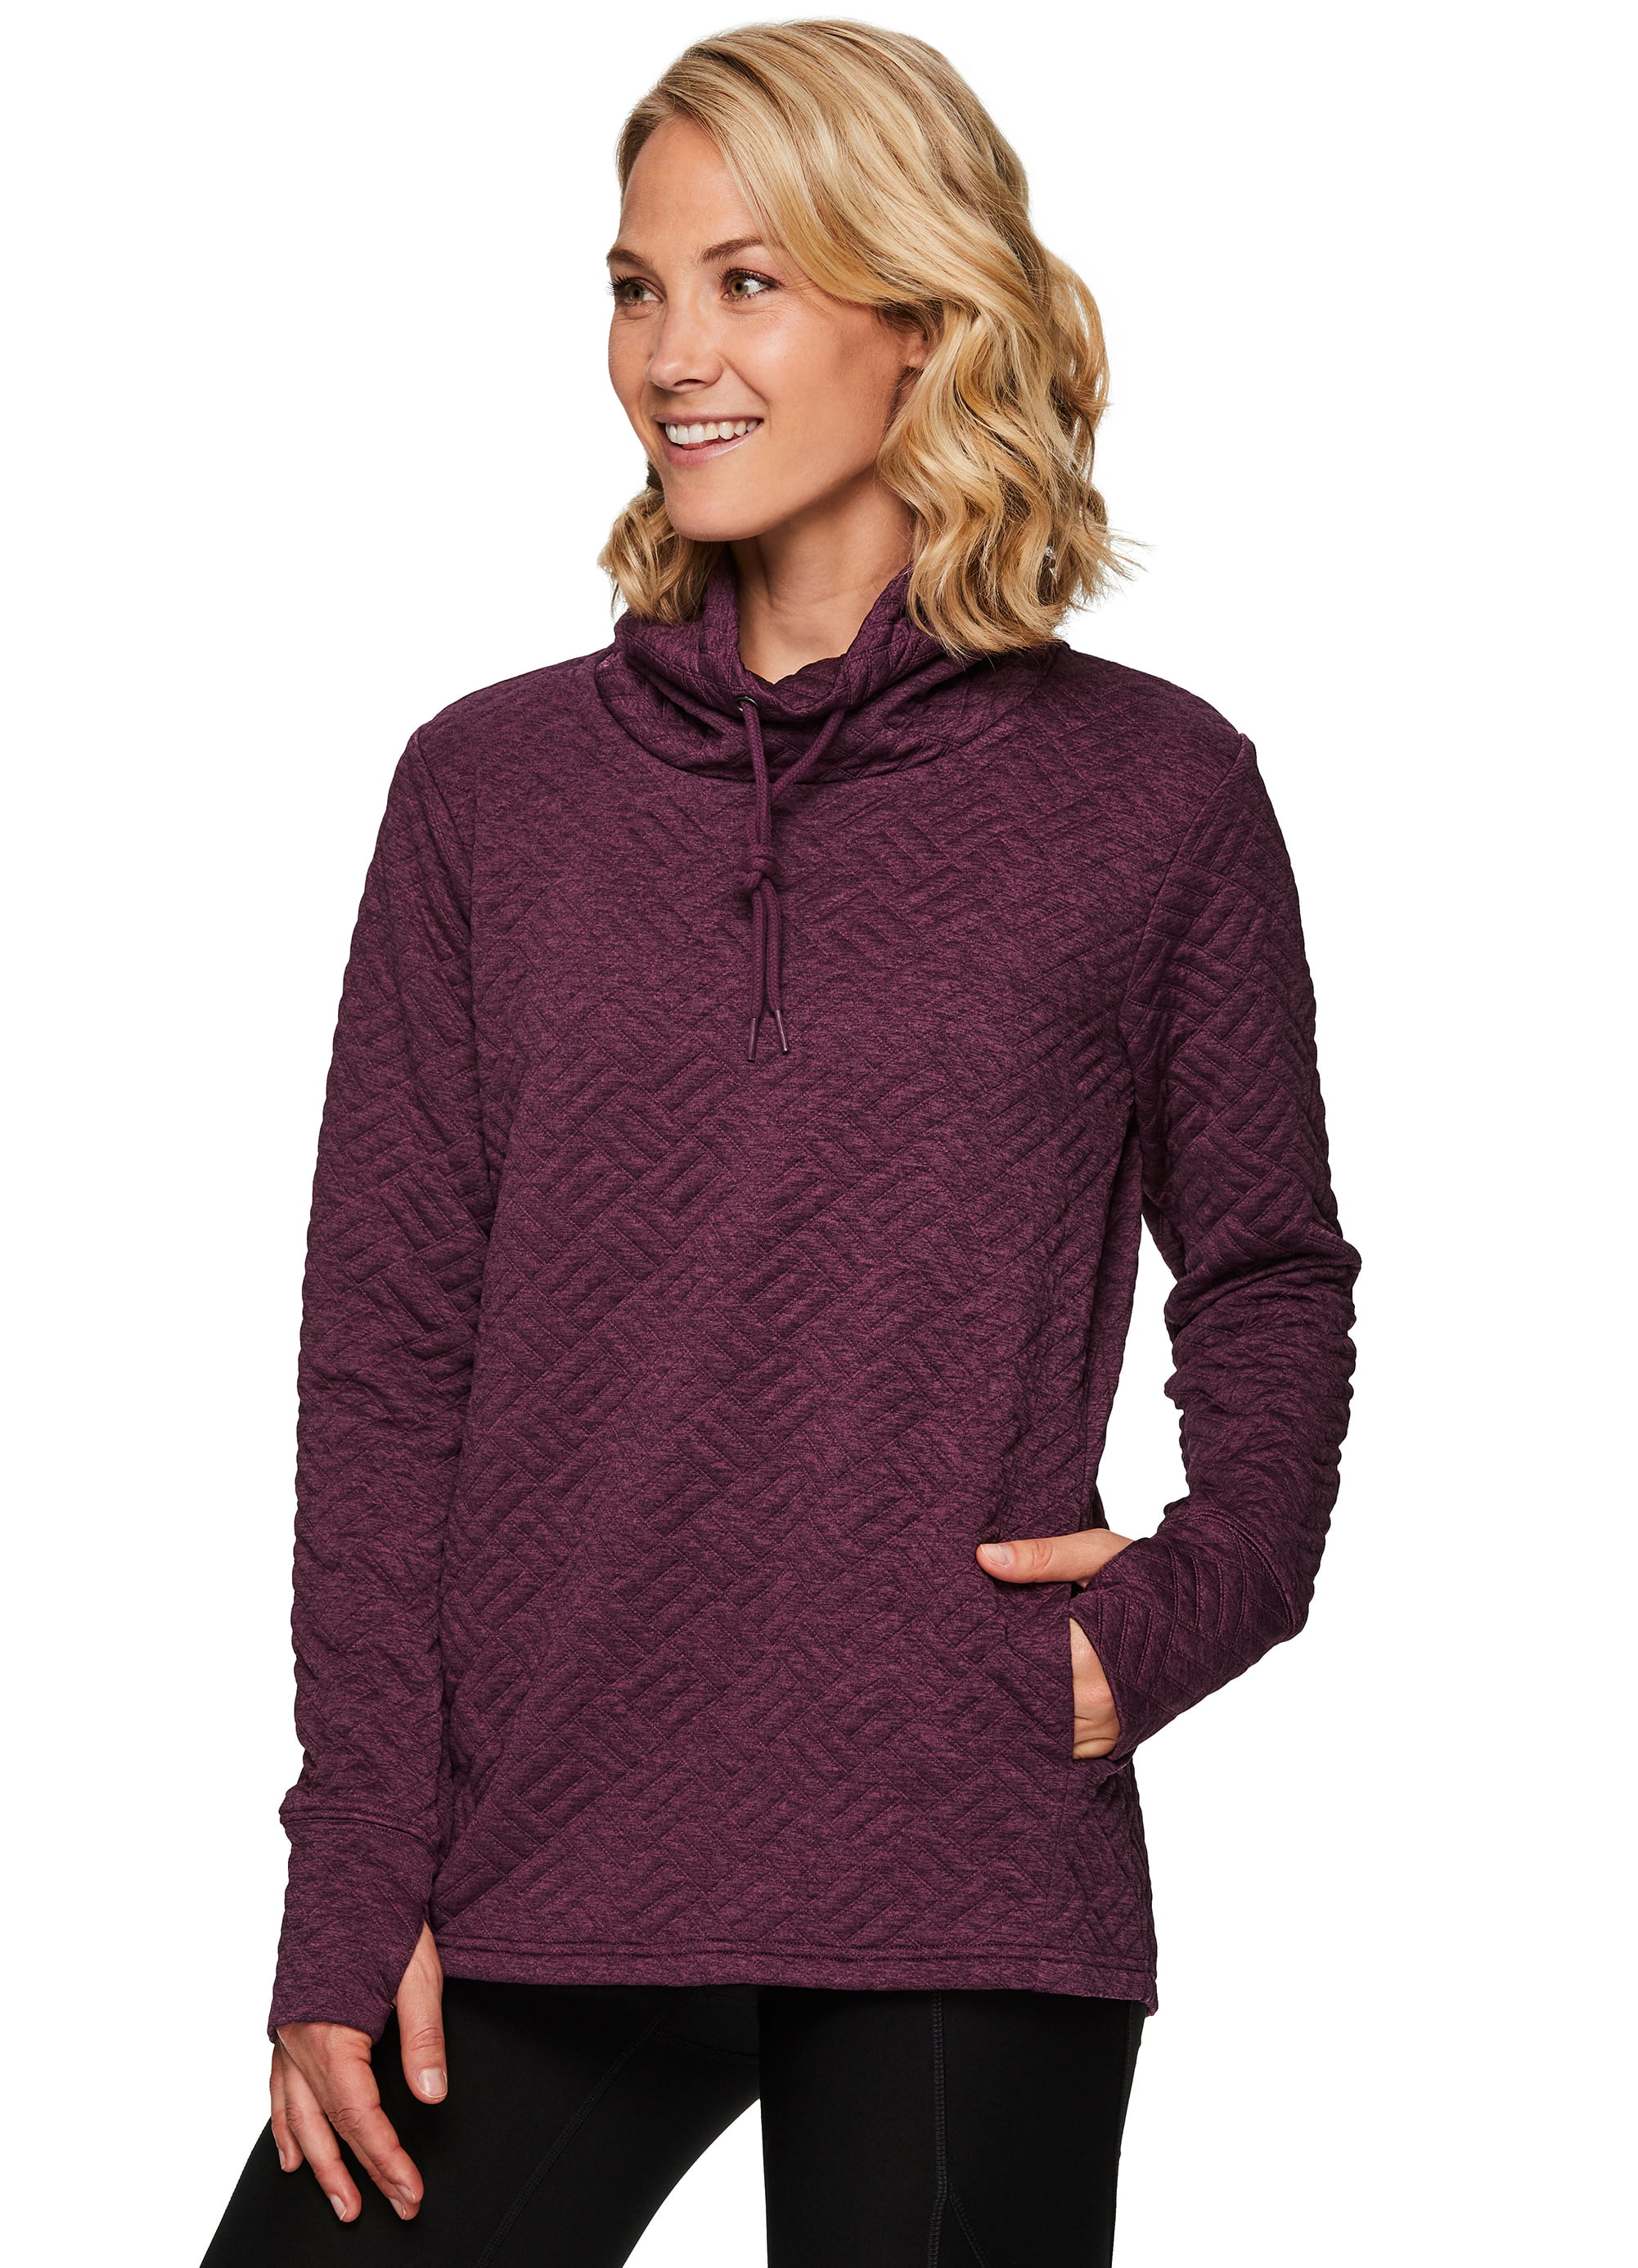 rbx-rbx-active-women-s-ultra-soft-quilted-cowl-neck-pullover